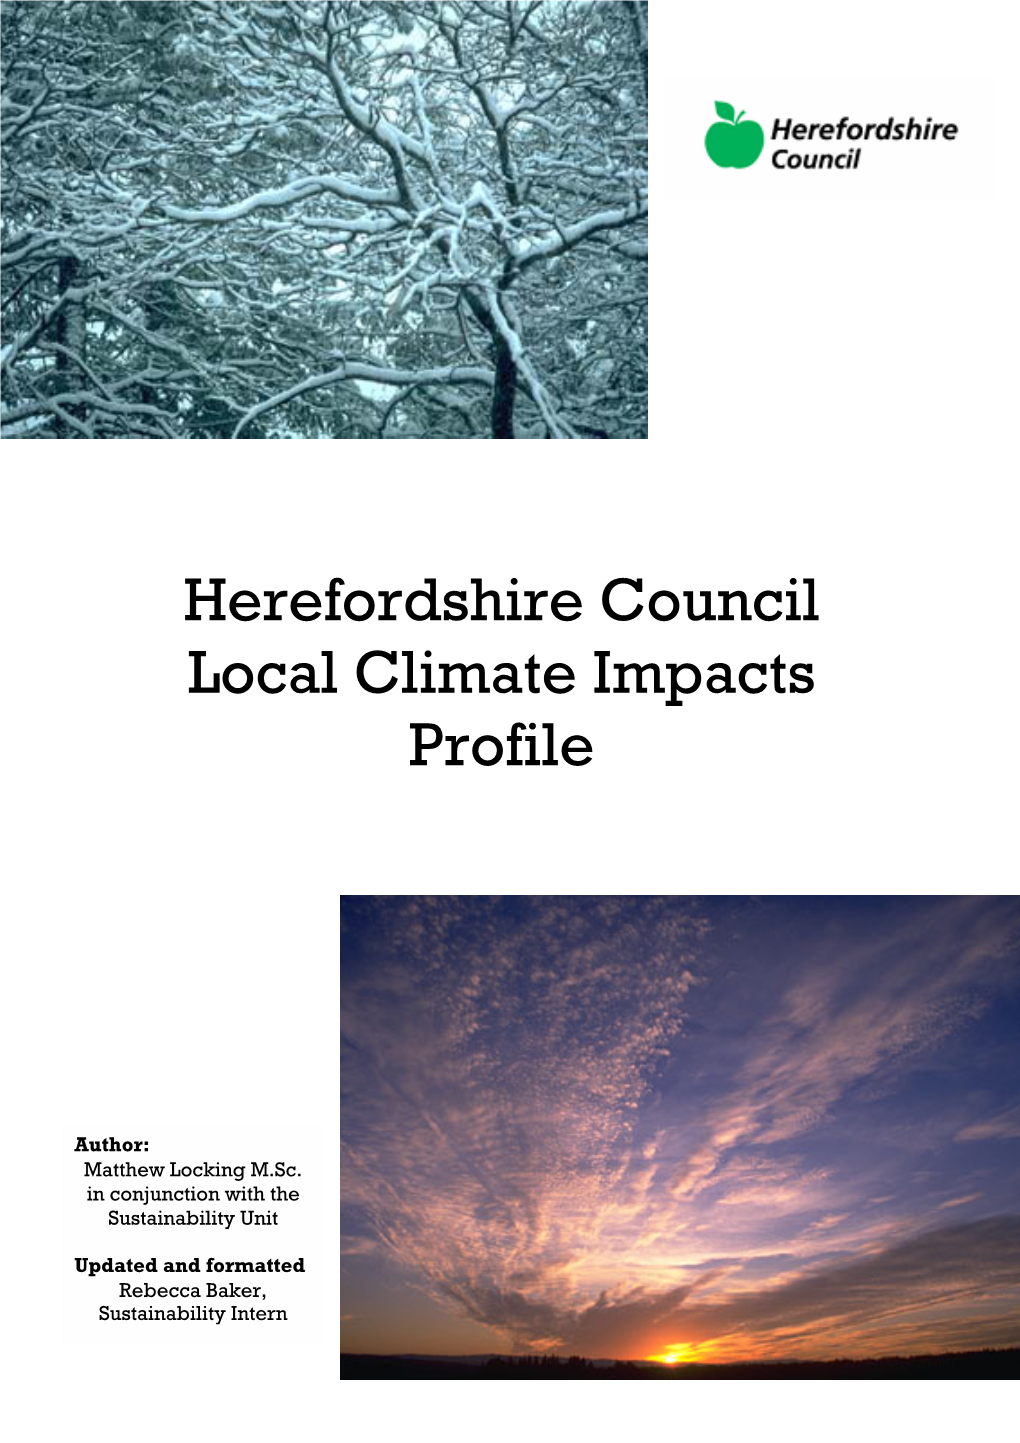 Herefordshire Council Local Climate Impacts Profile